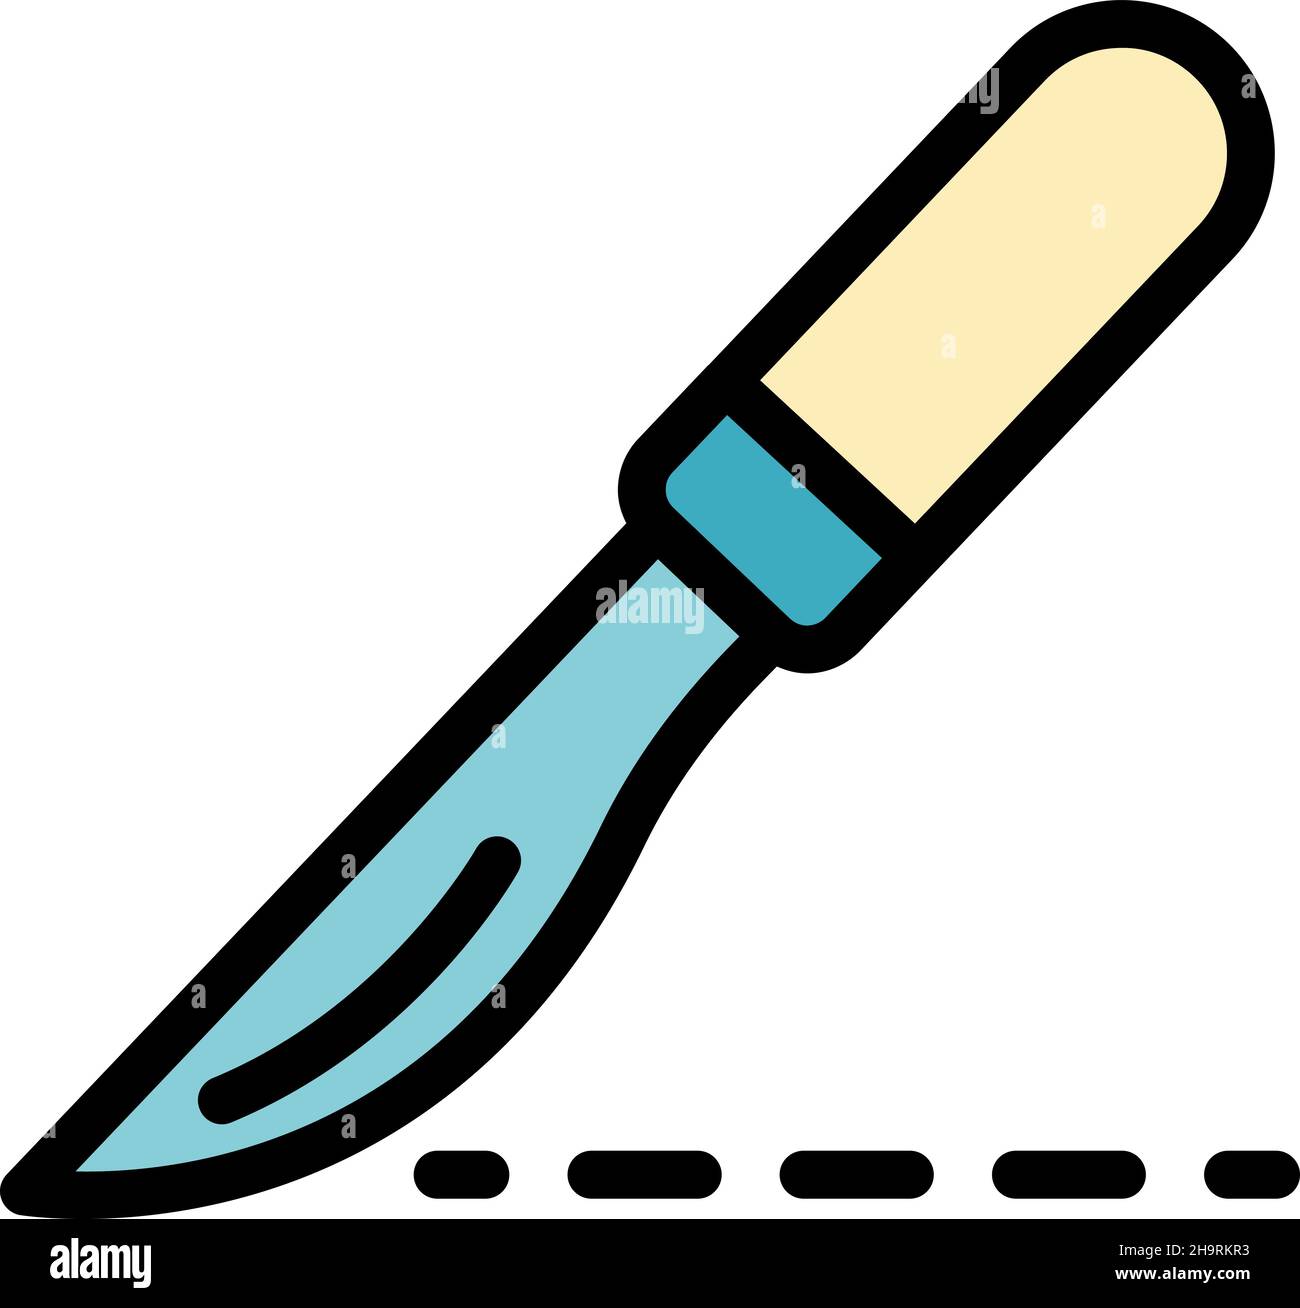 https://c8.alamy.com/comp/2H9RKR3/chirurgical-scalpel-icon-outline-chirurgical-scalpel-vector-icon-color-flat-isolated-2H9RKR3.jpg